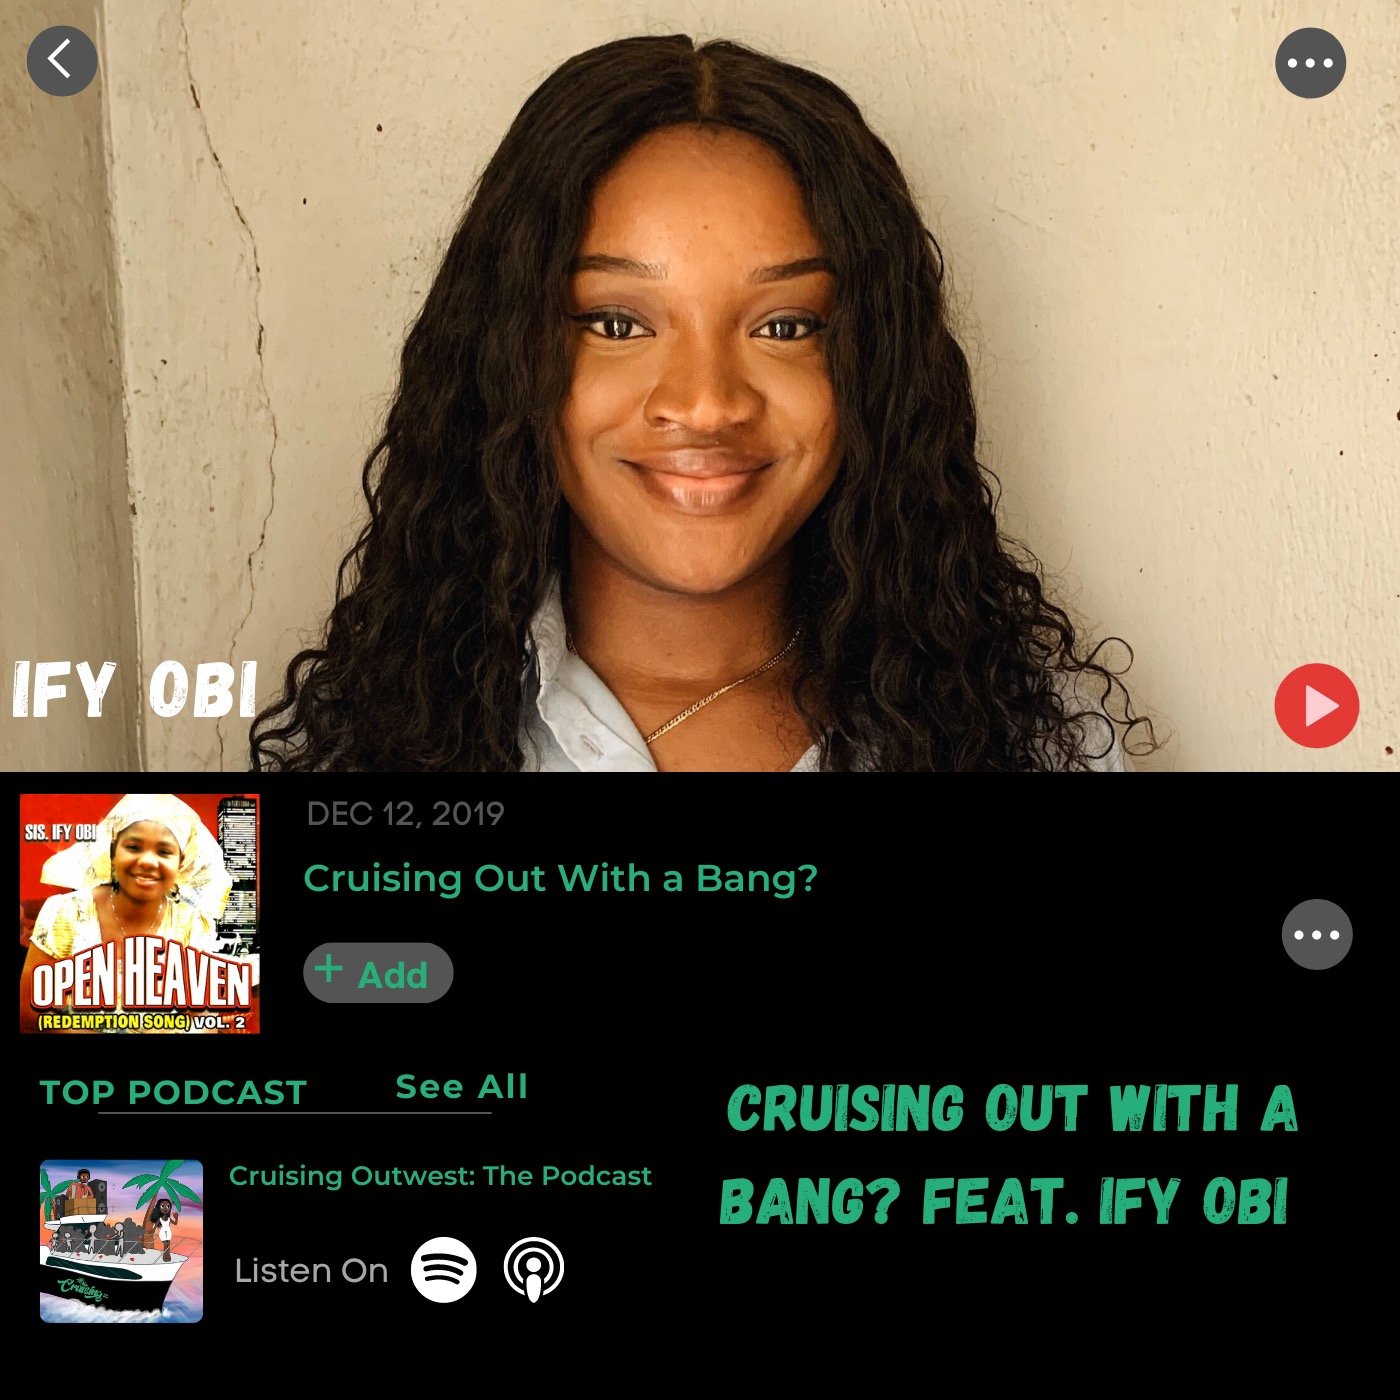 S2E20: Cruising Out With a Bang? ft. Ify Obi